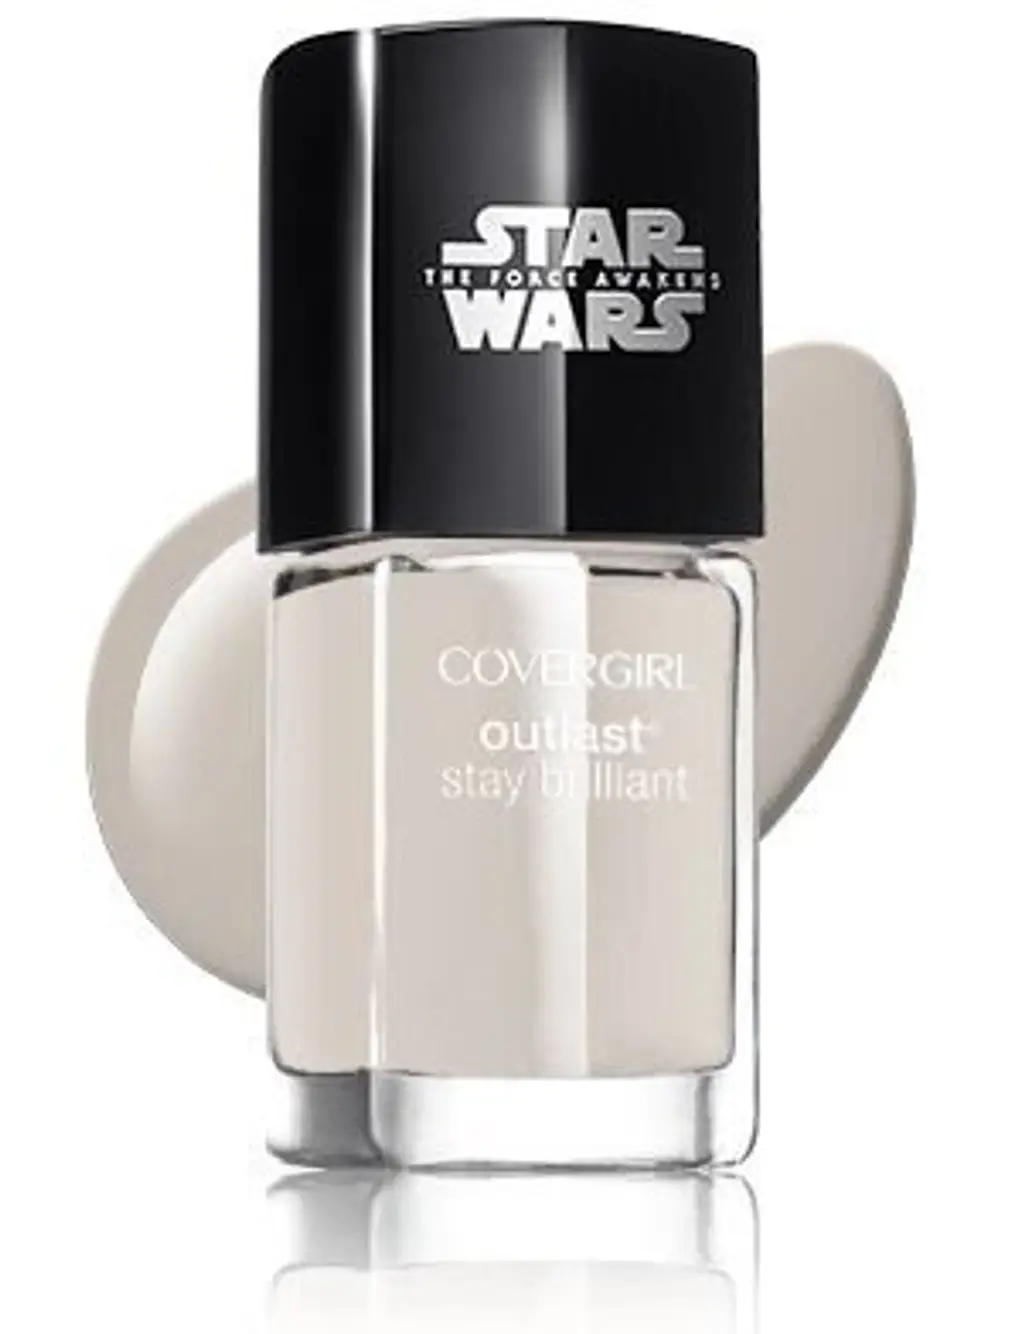 CoverGirl Star Wars Outlast Nail Polish in Speed of Light